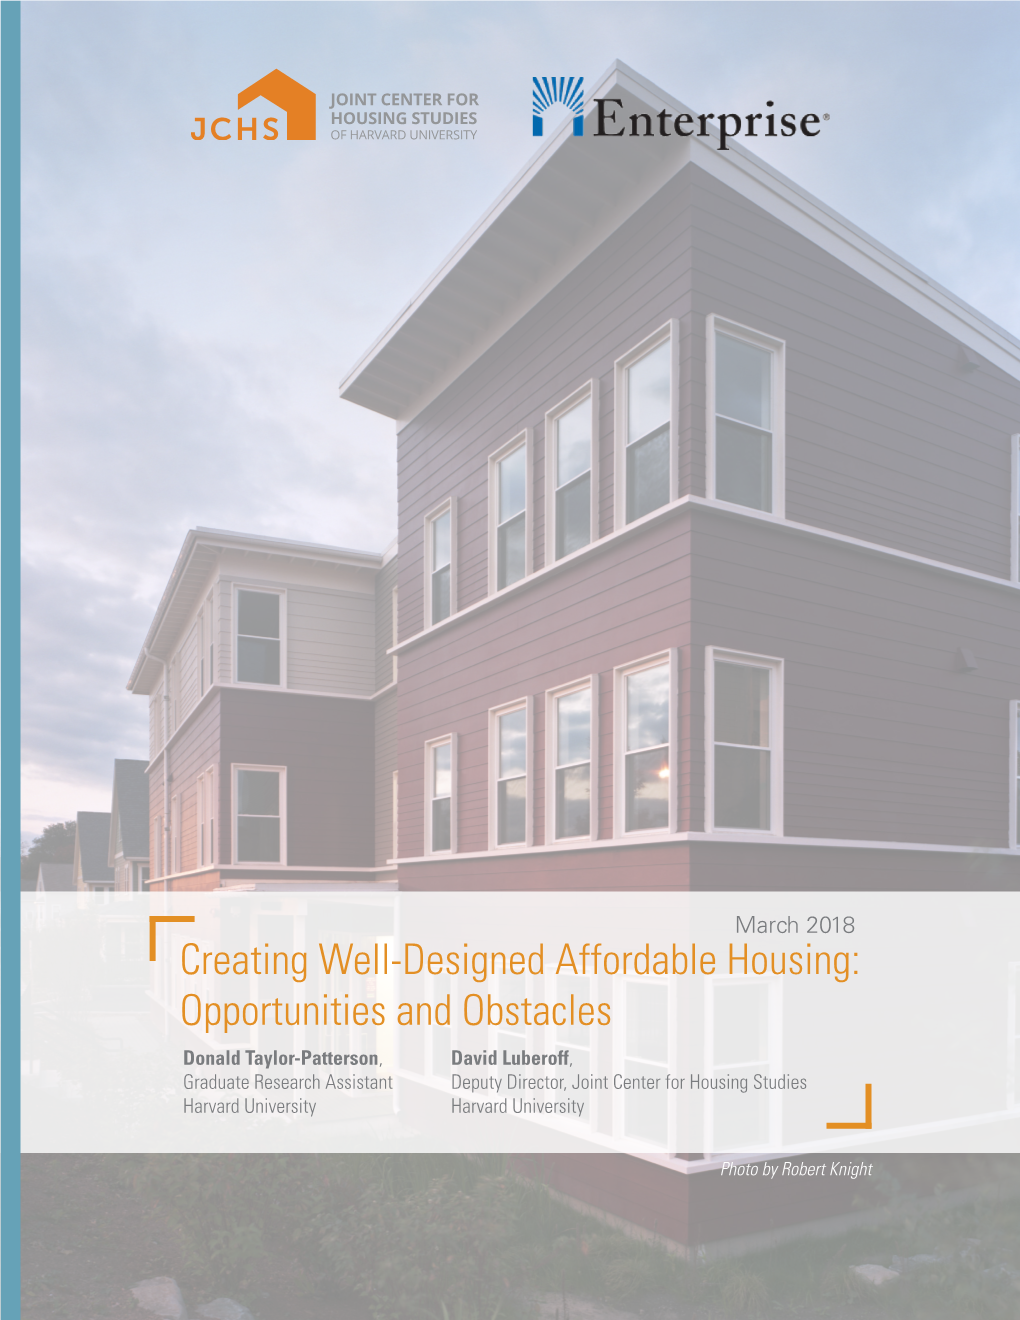 Creating Well-Designed Affordable Housing: Opportunities and Obstacles